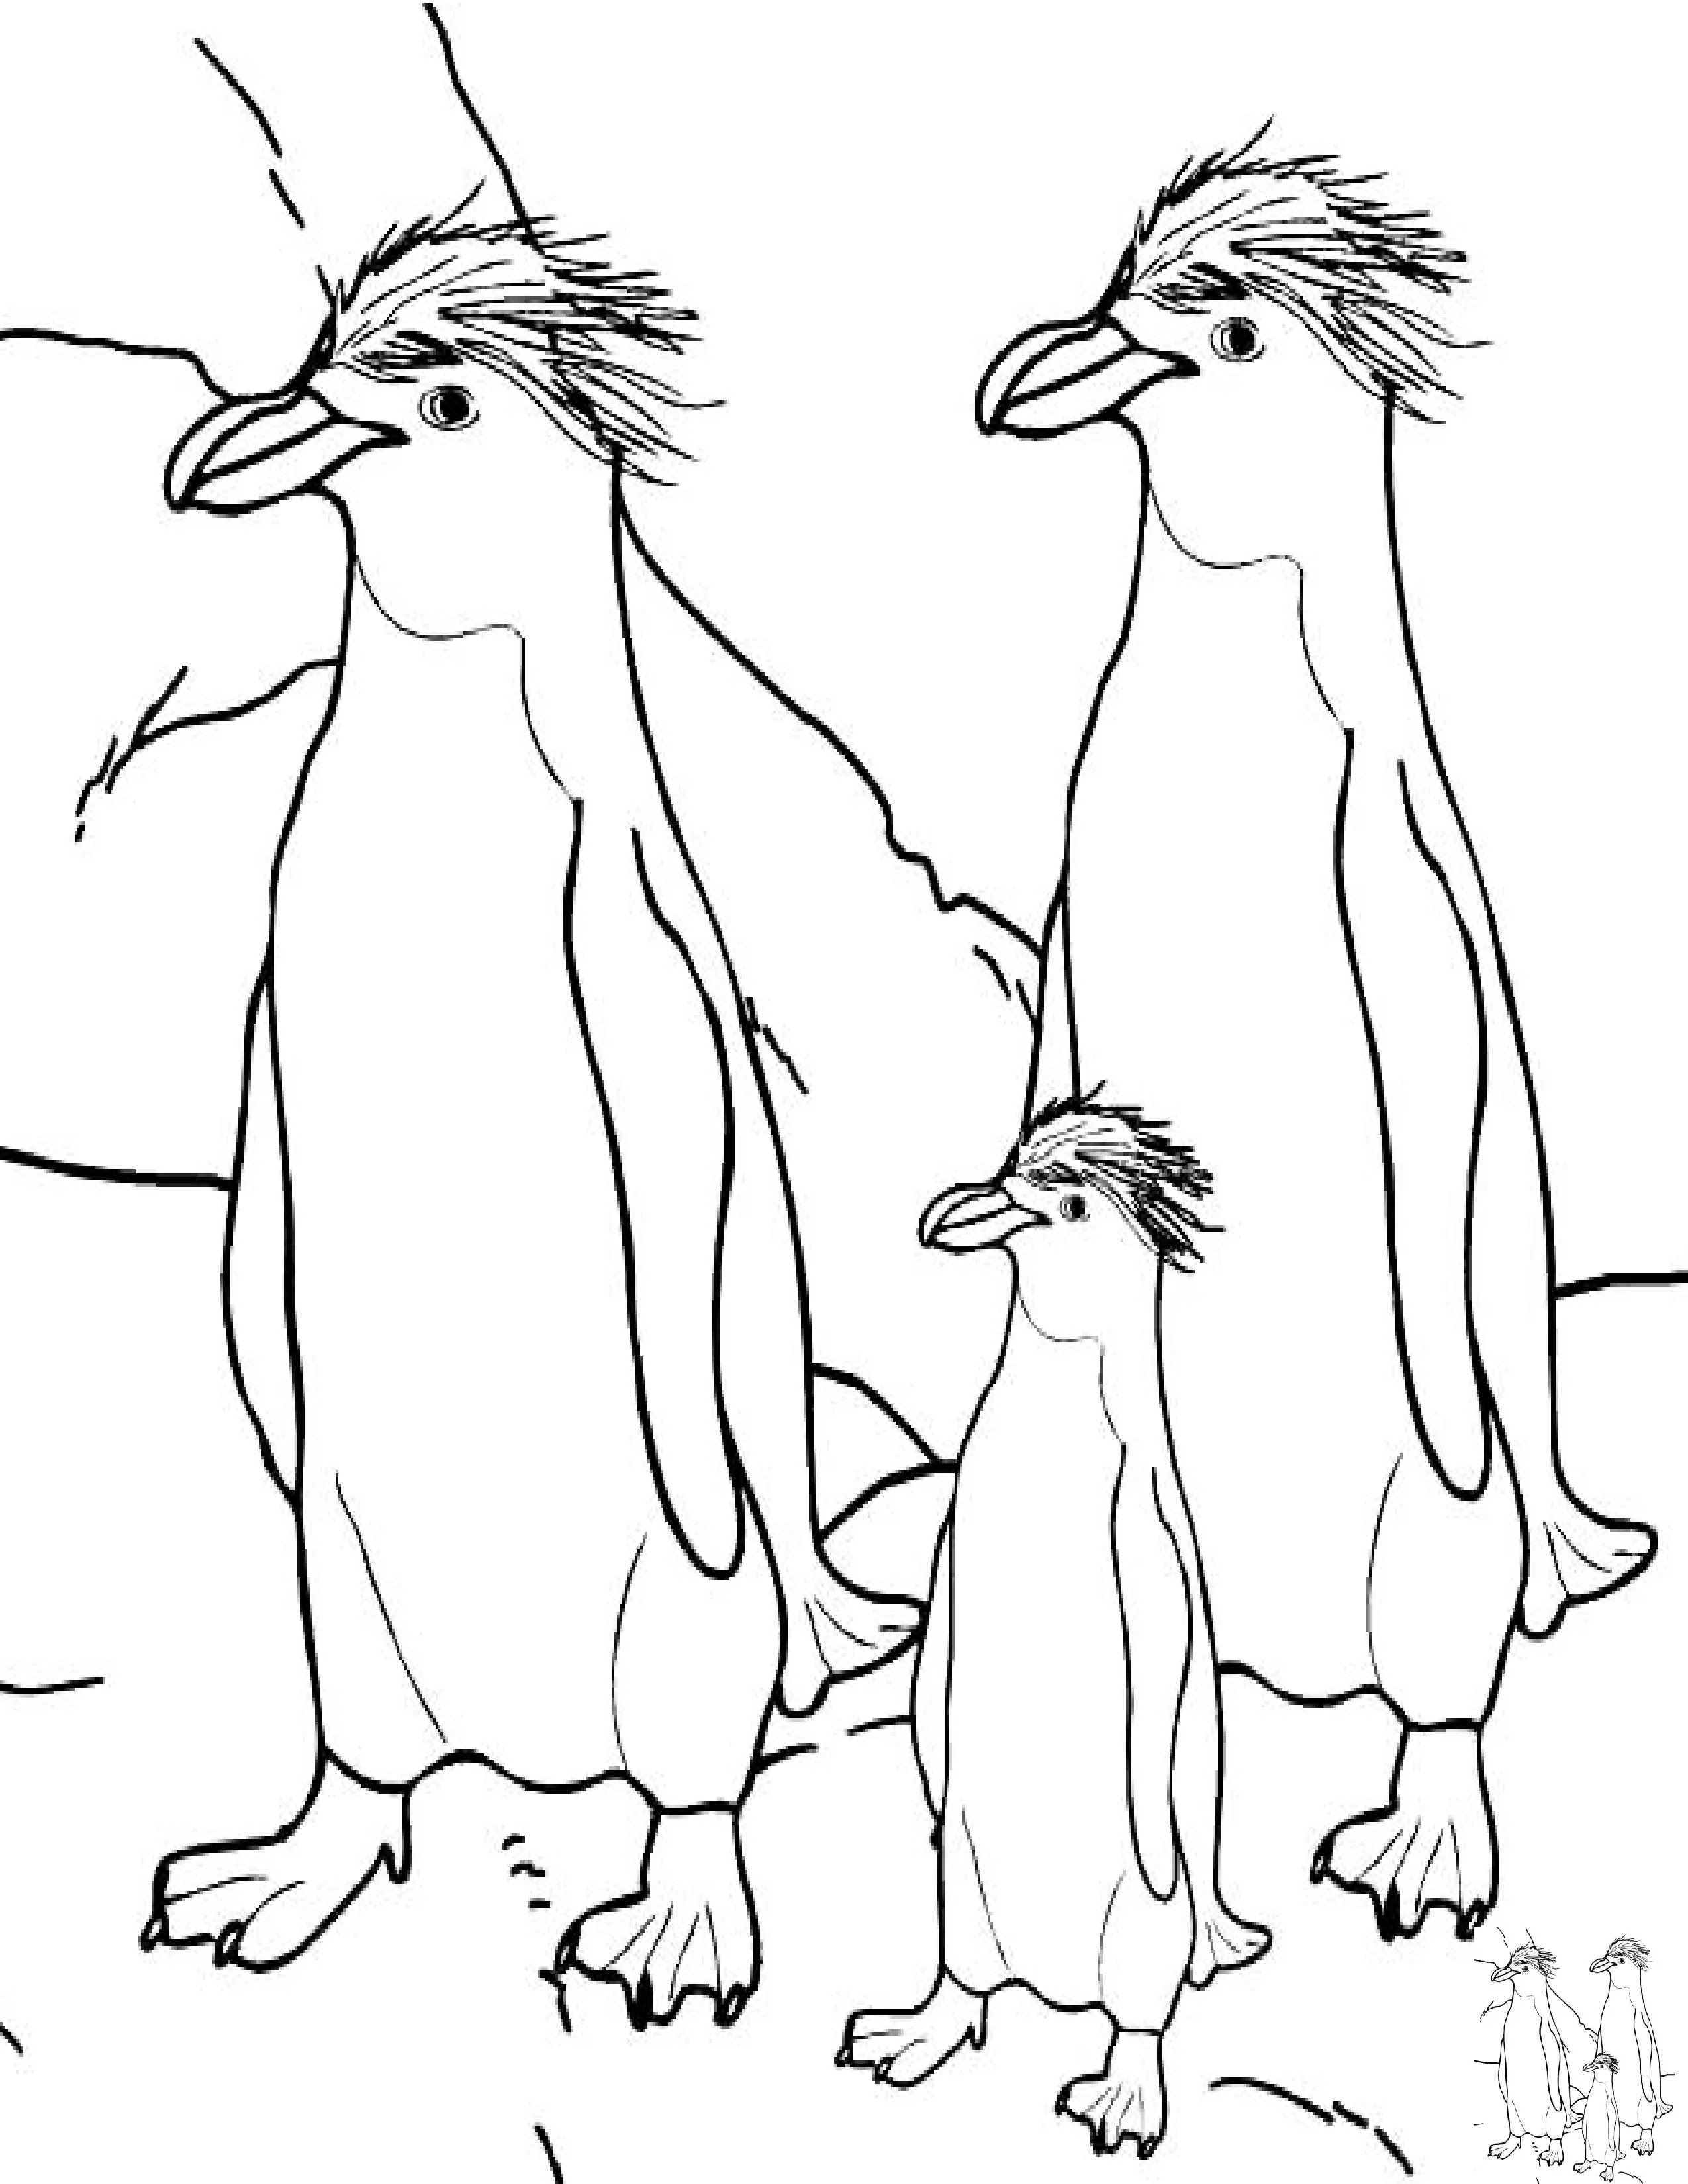 Coloring pages of penguin